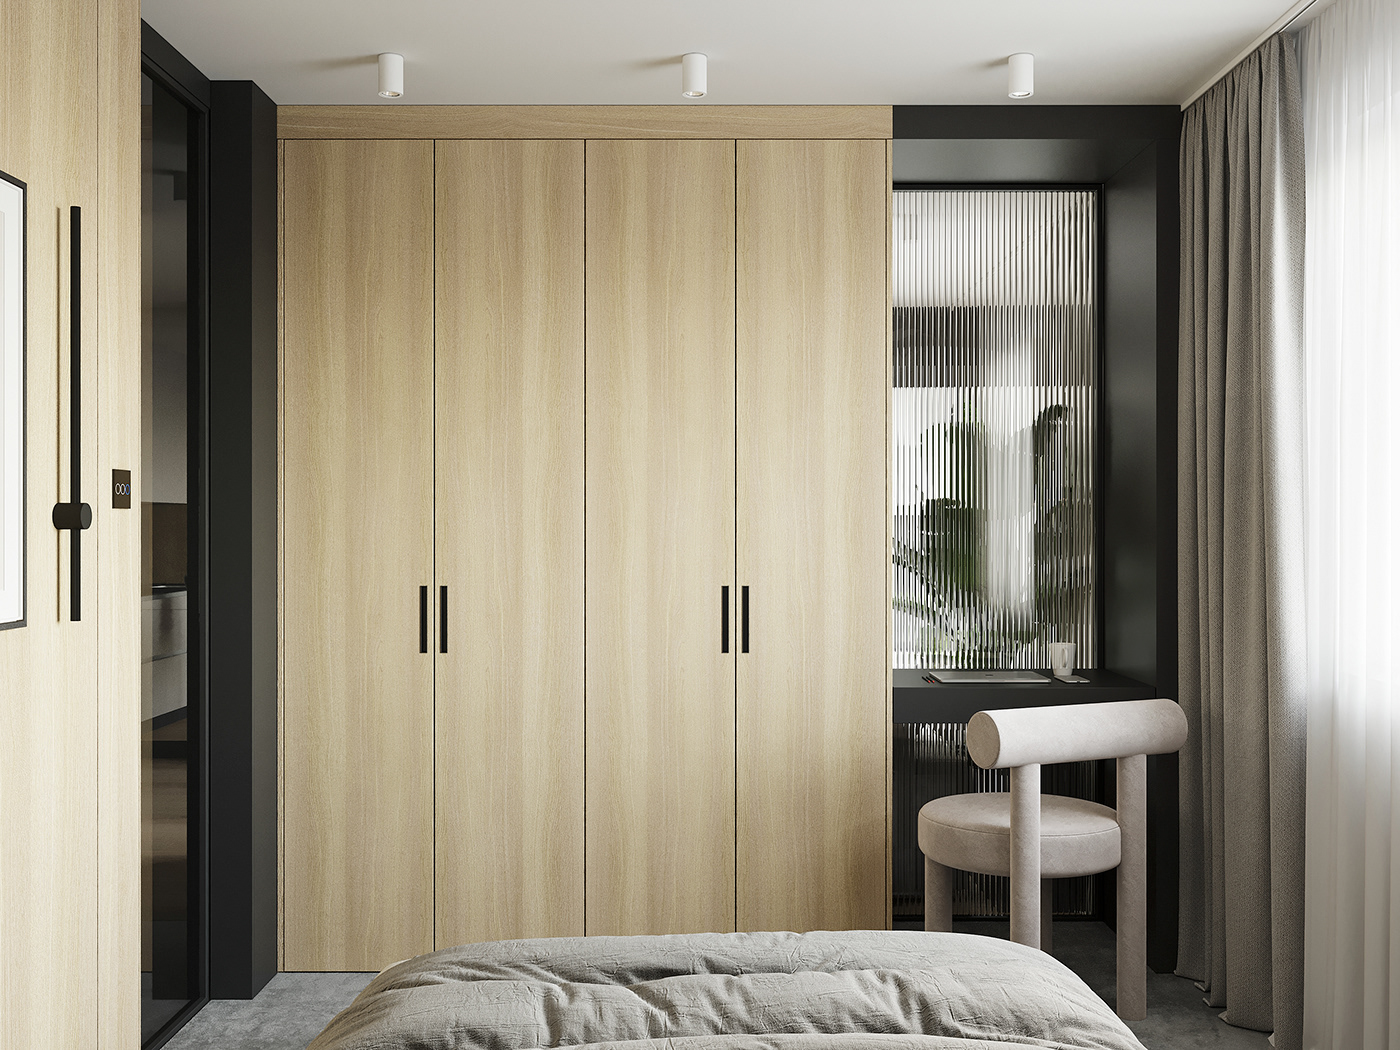 A 4-drawer wardrobe opposite the bed helps to keep the room neat and tidy.